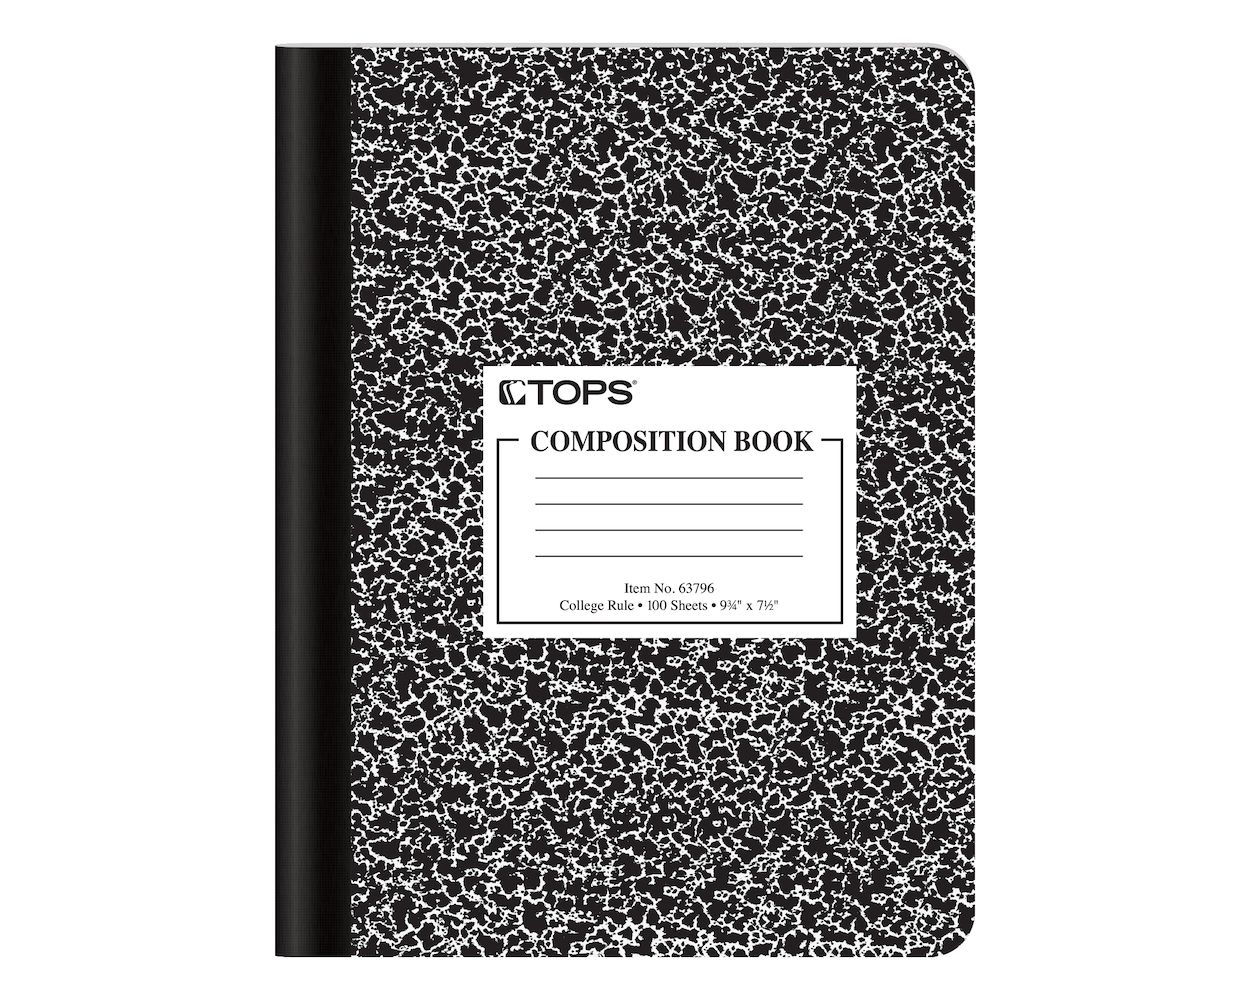 TOPS Composition Book, 9-3/4" x 7-1/2", College Rule, Black Marble Cover,  100 Sheets